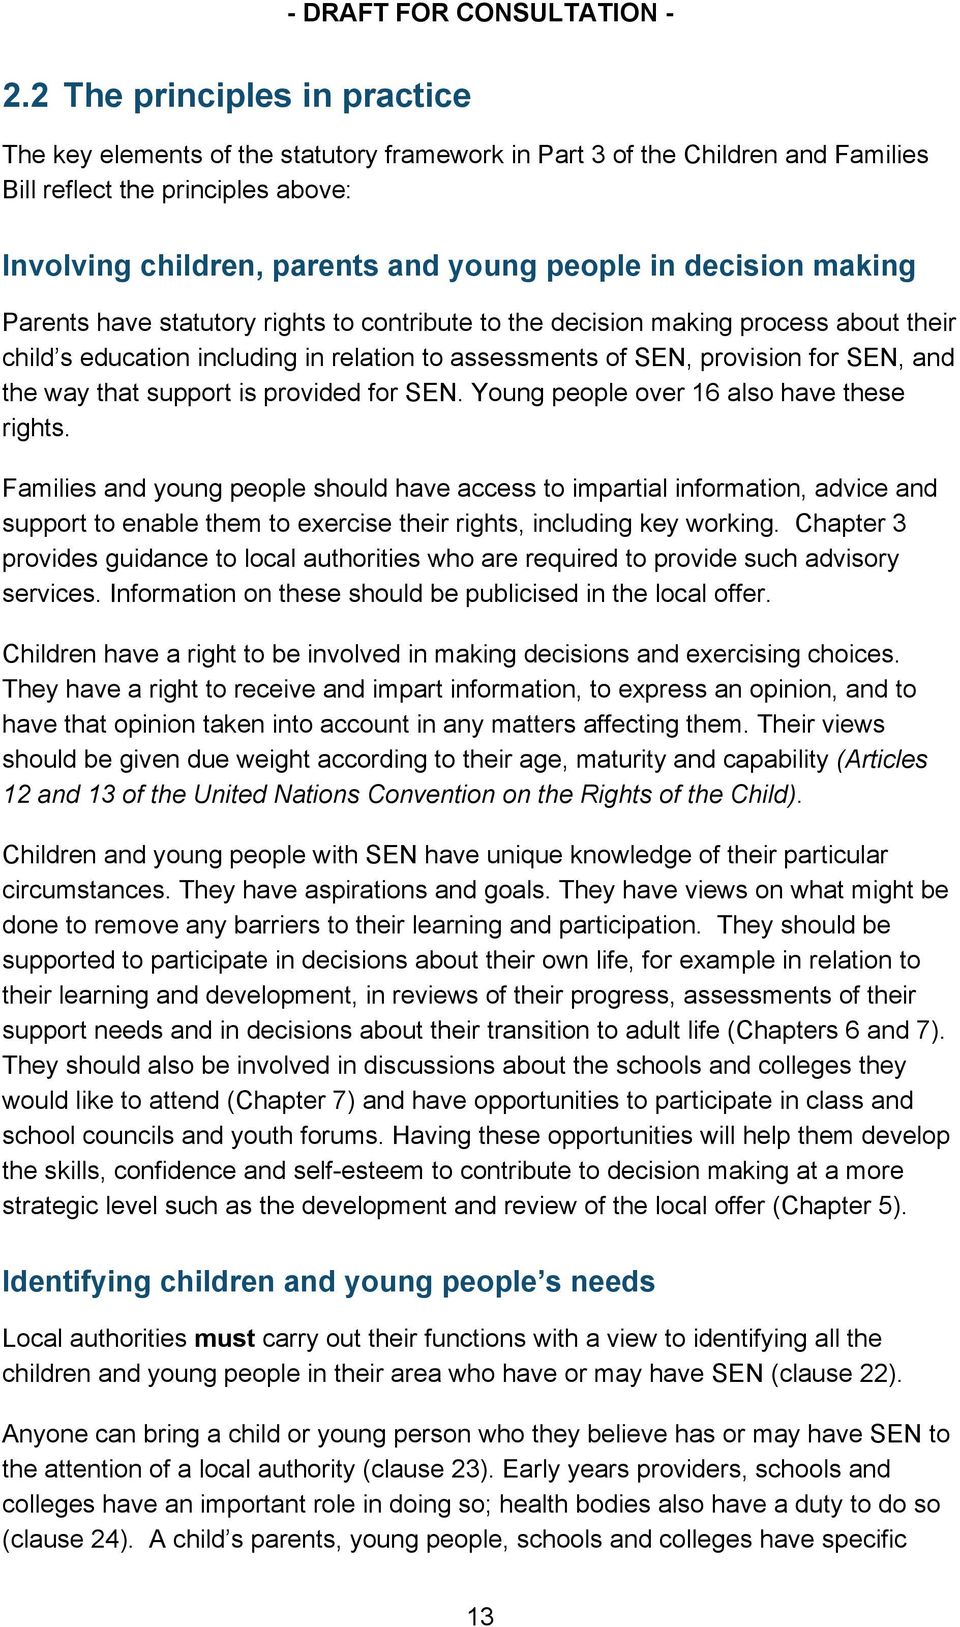 that support is provided for SEN. Young people over 16 also have these rights.